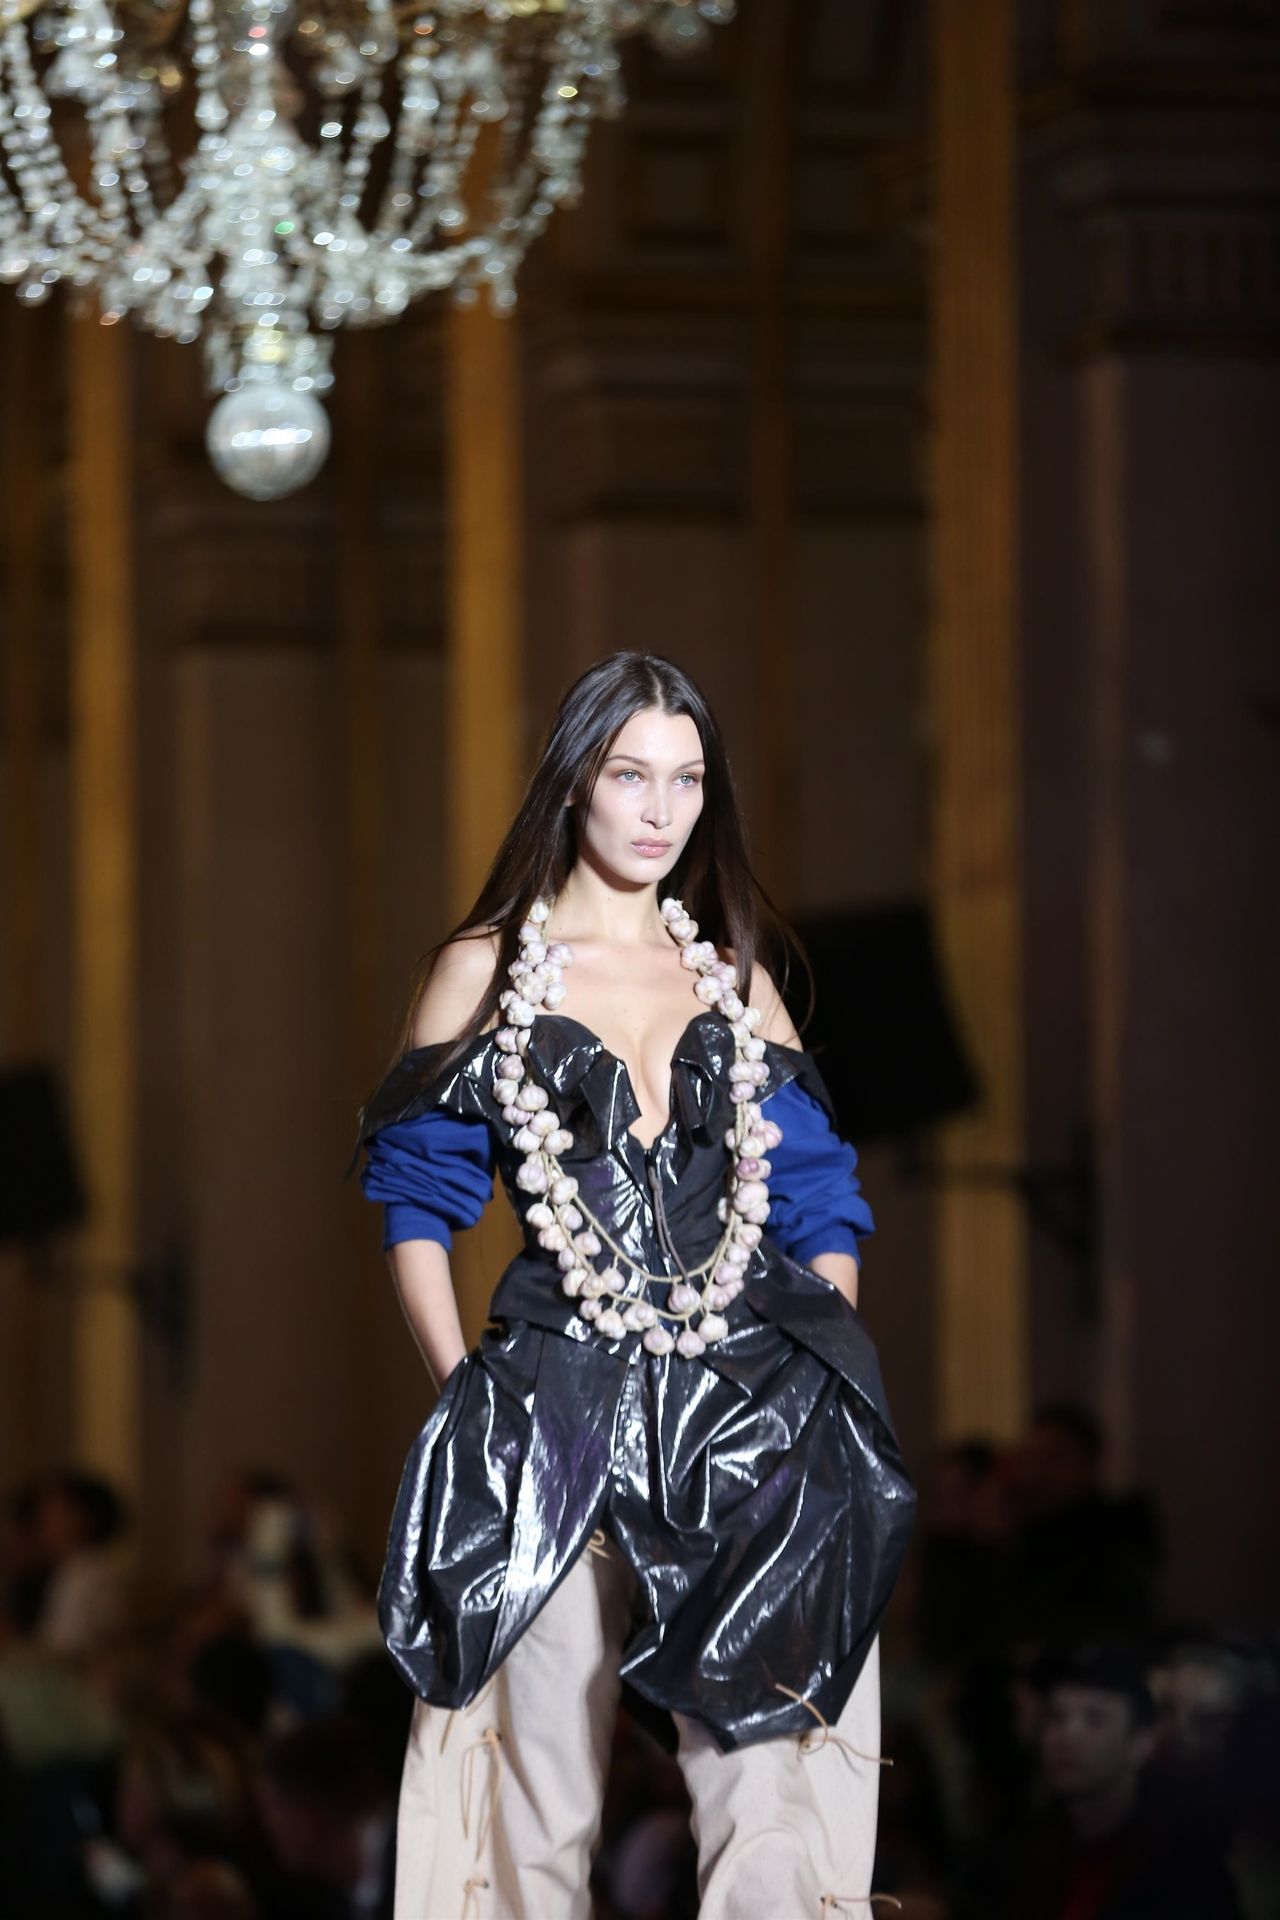 Bella Hadid Shows Her Tits at the Catwalk at Vivienne Westwood Fashion Show (30 Photos)